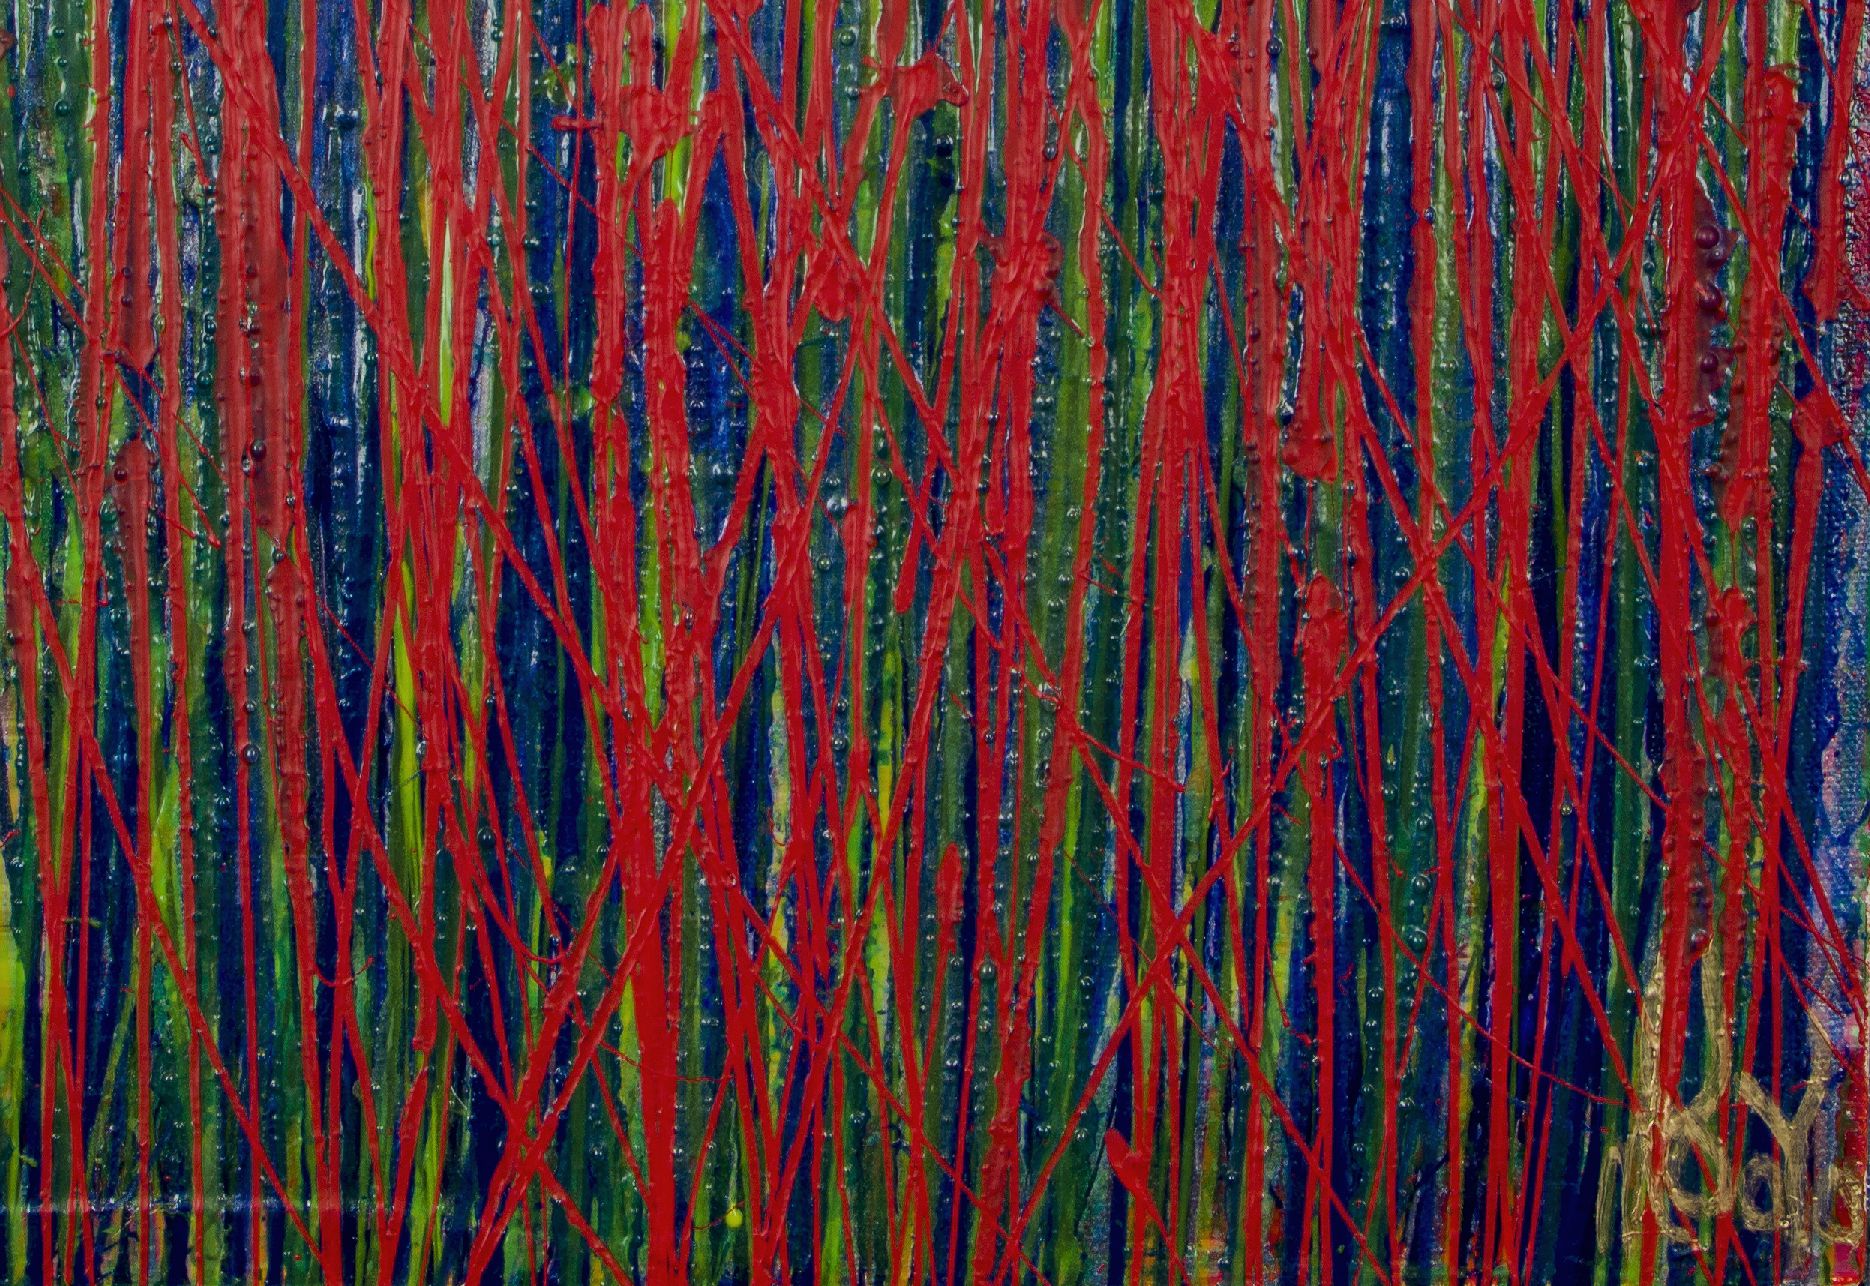 Signature - Like Nothing Else (Experimental Garden) (2021) 22x18 inches by Nestor Toro